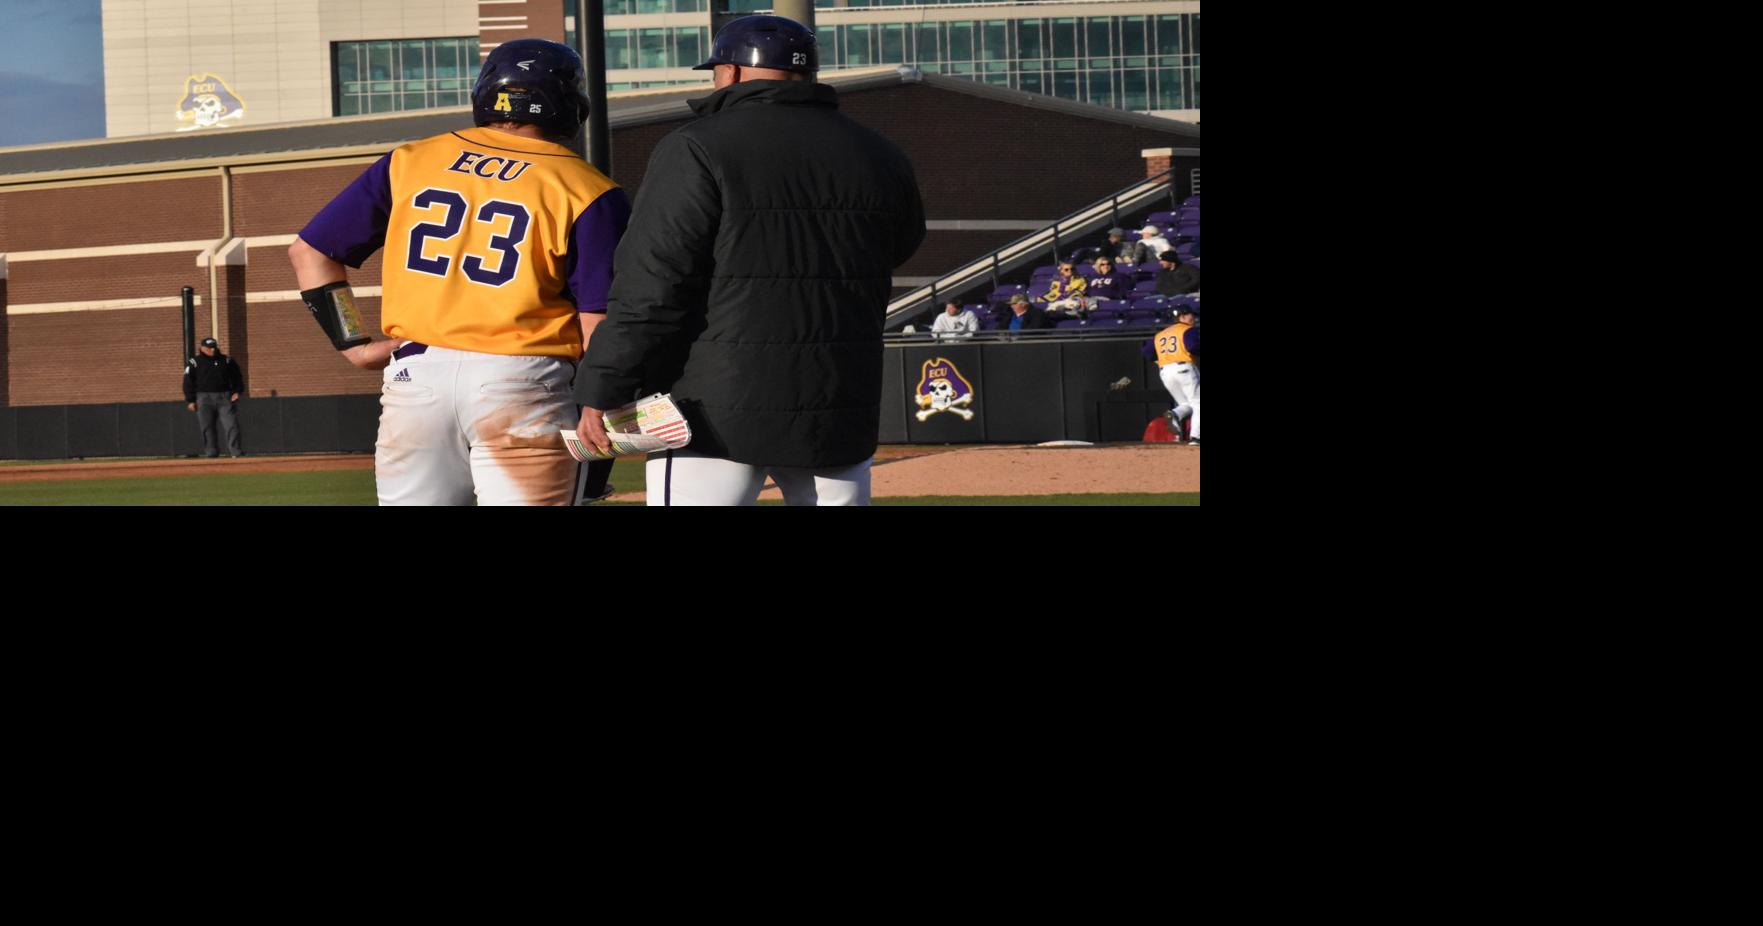 East Carolina Baseball on X: Every single member of our team will wear the  legendary #23 this weekend for Coach LeClair and his family. We will play  baseball in a way he